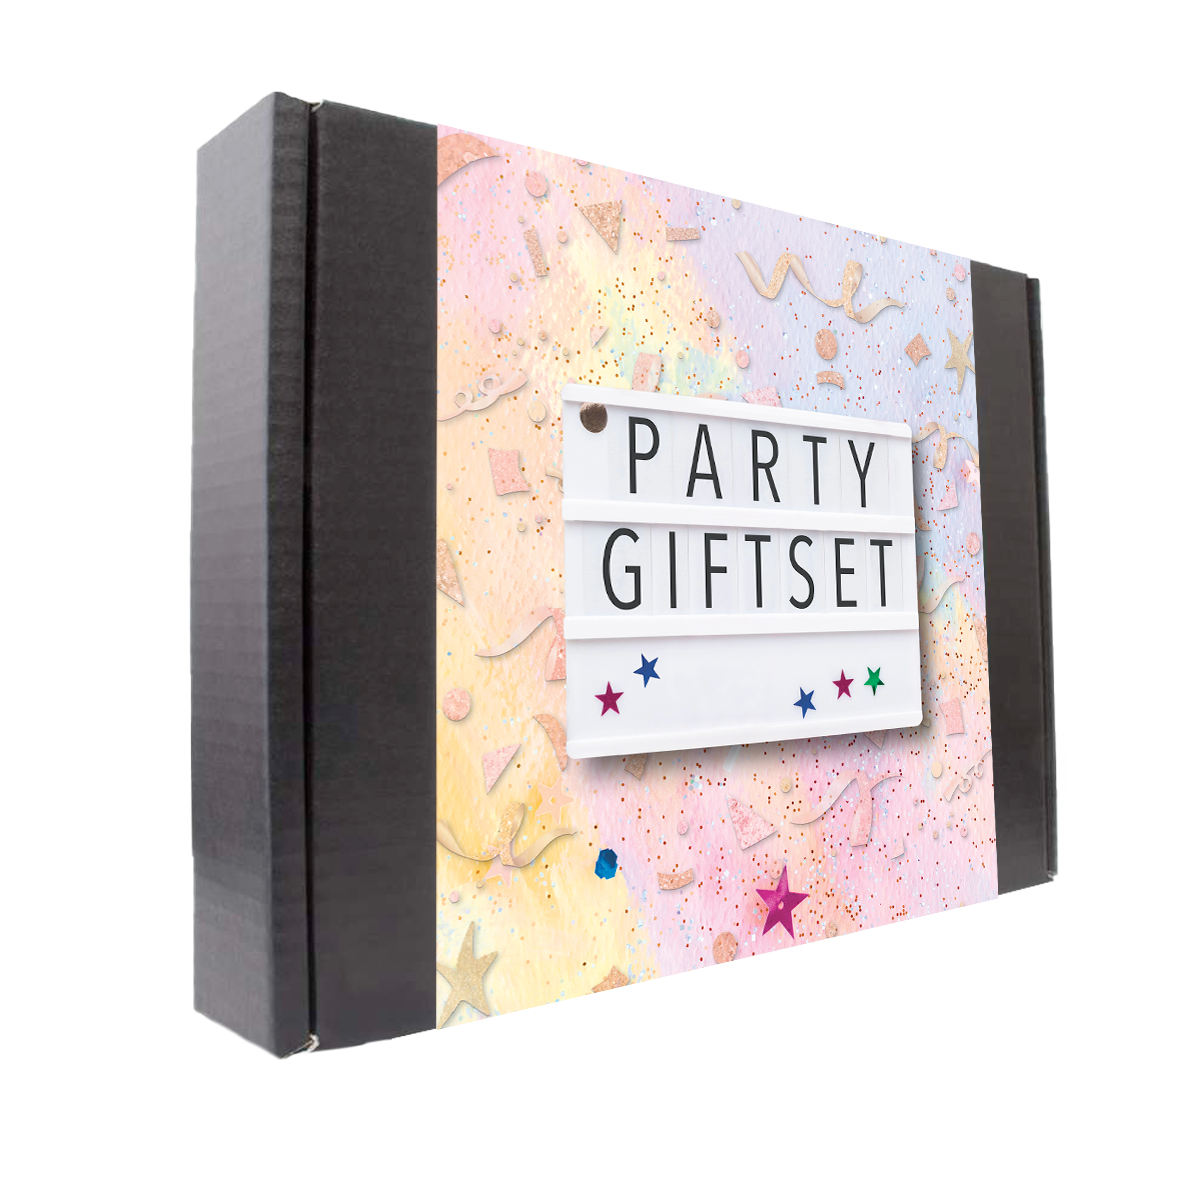 Party Giftset